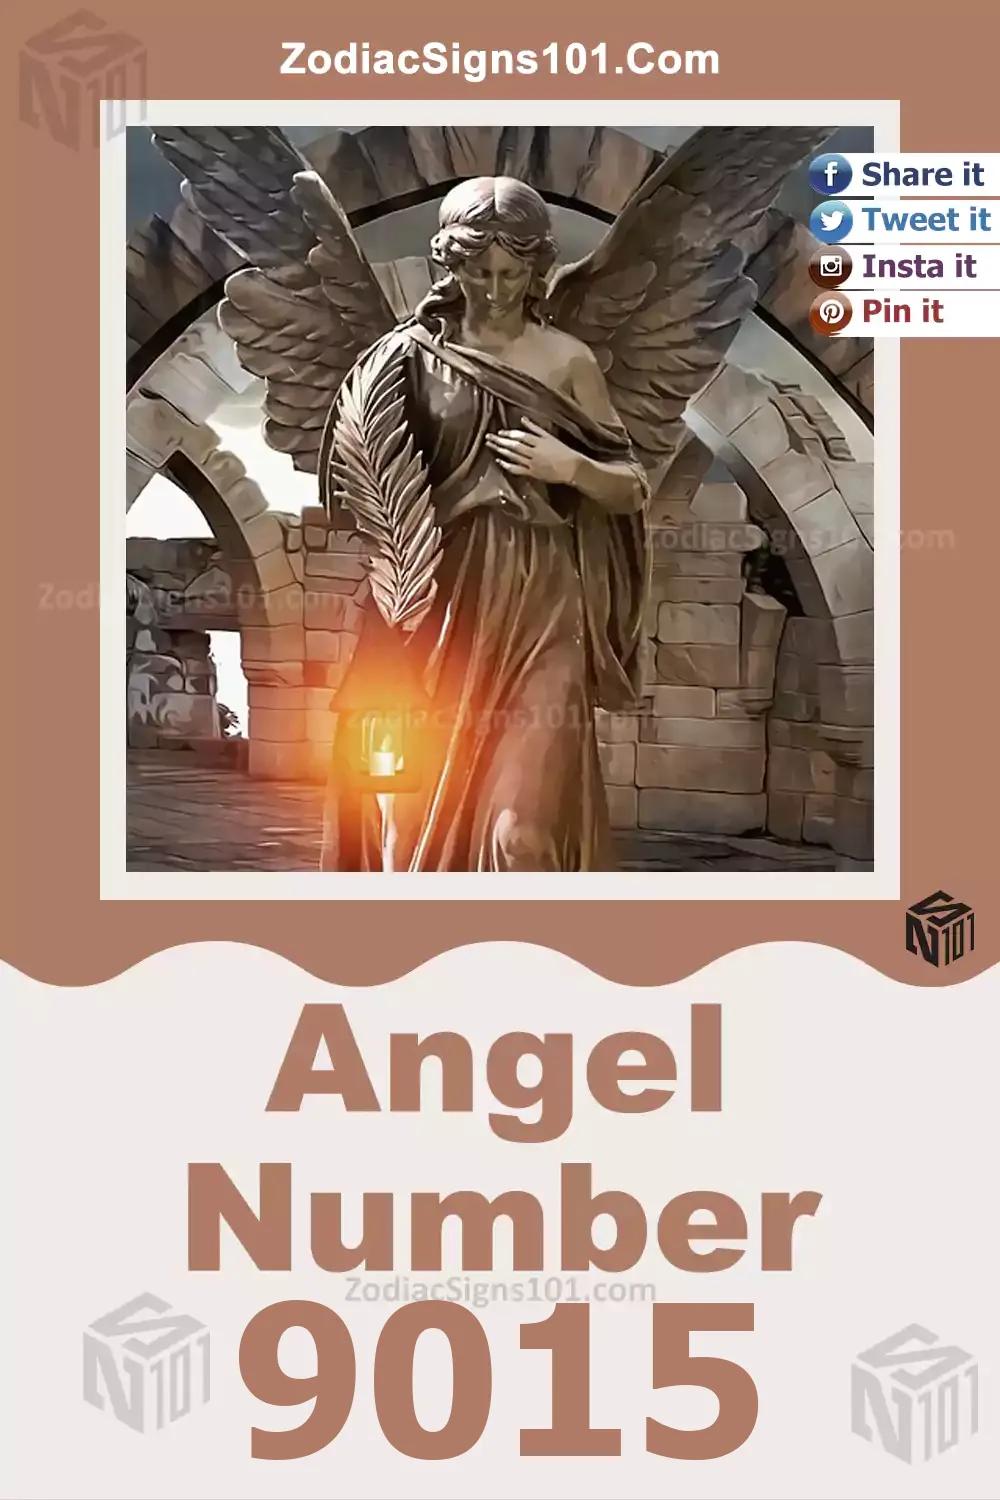 9015 Angel Number Meaning